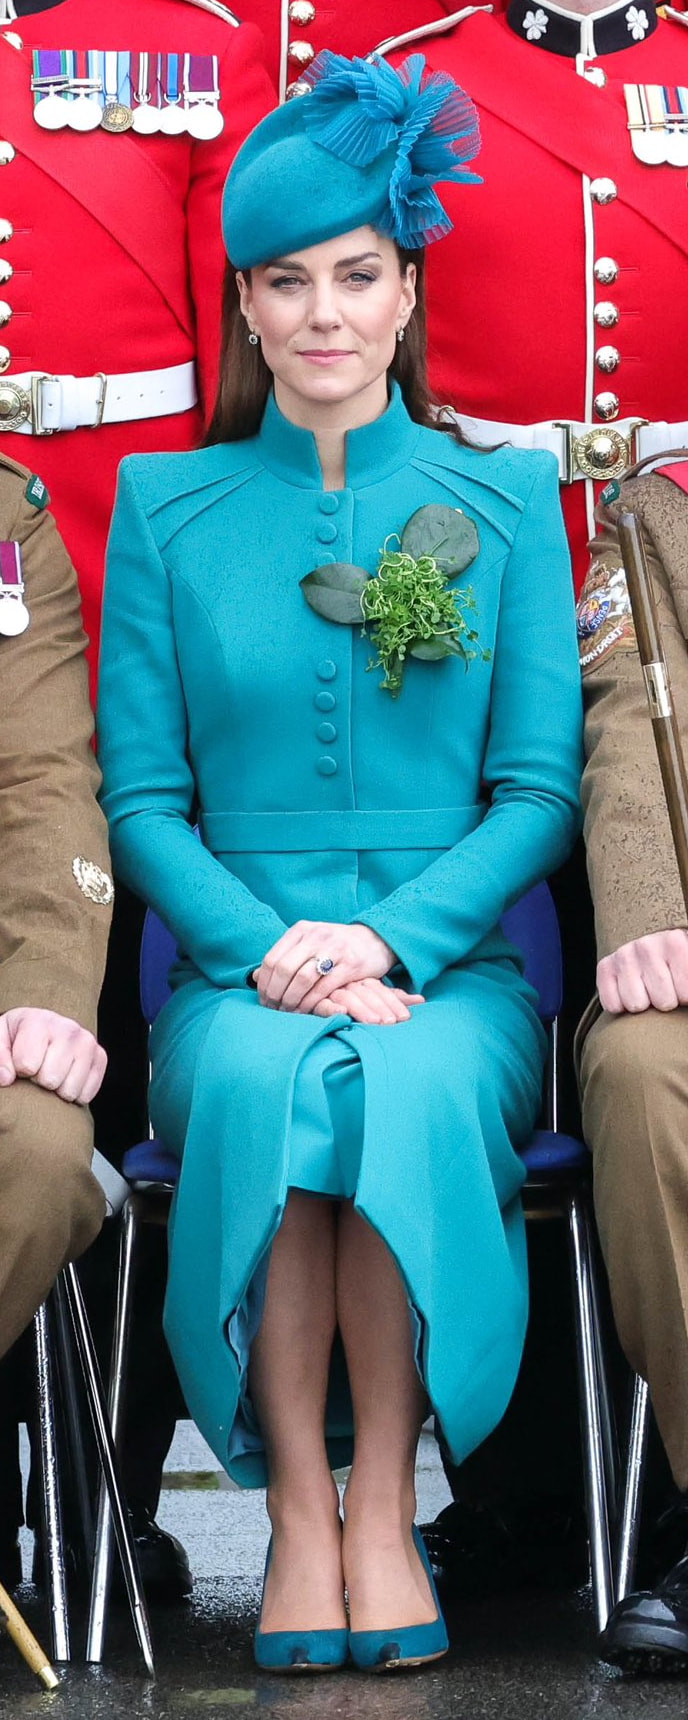 Gianvito Rossi 105 Pumps in Teal Suede as seen on Kate Middleton,  Princess of Wales.